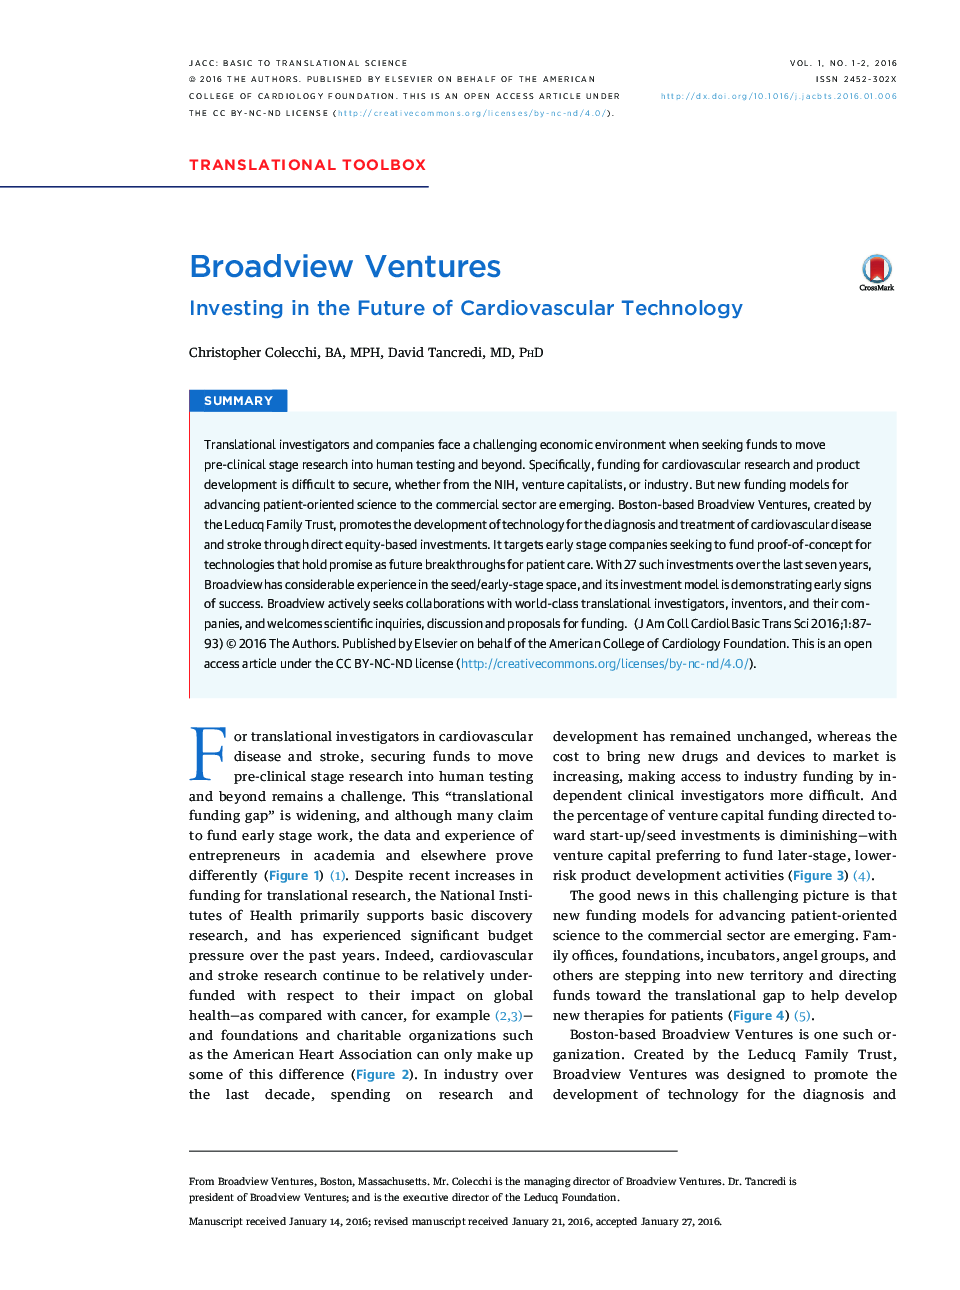 Broadview Ventures : Investing in the Future of Cardiovascular Technology